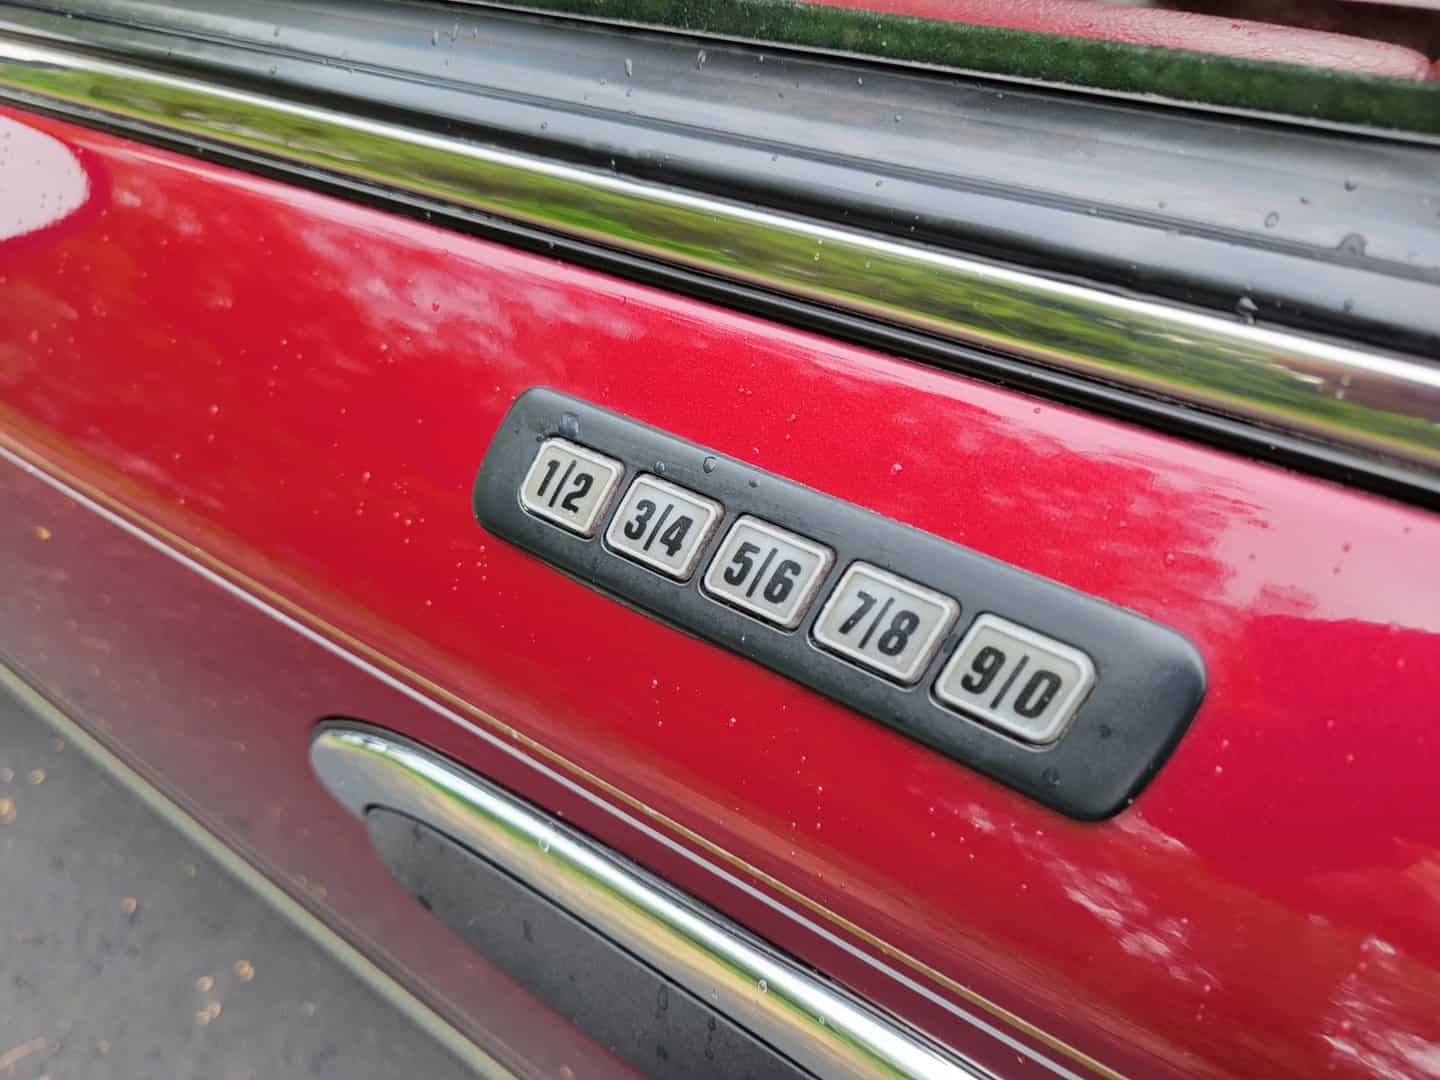 A red car door with a number on it.